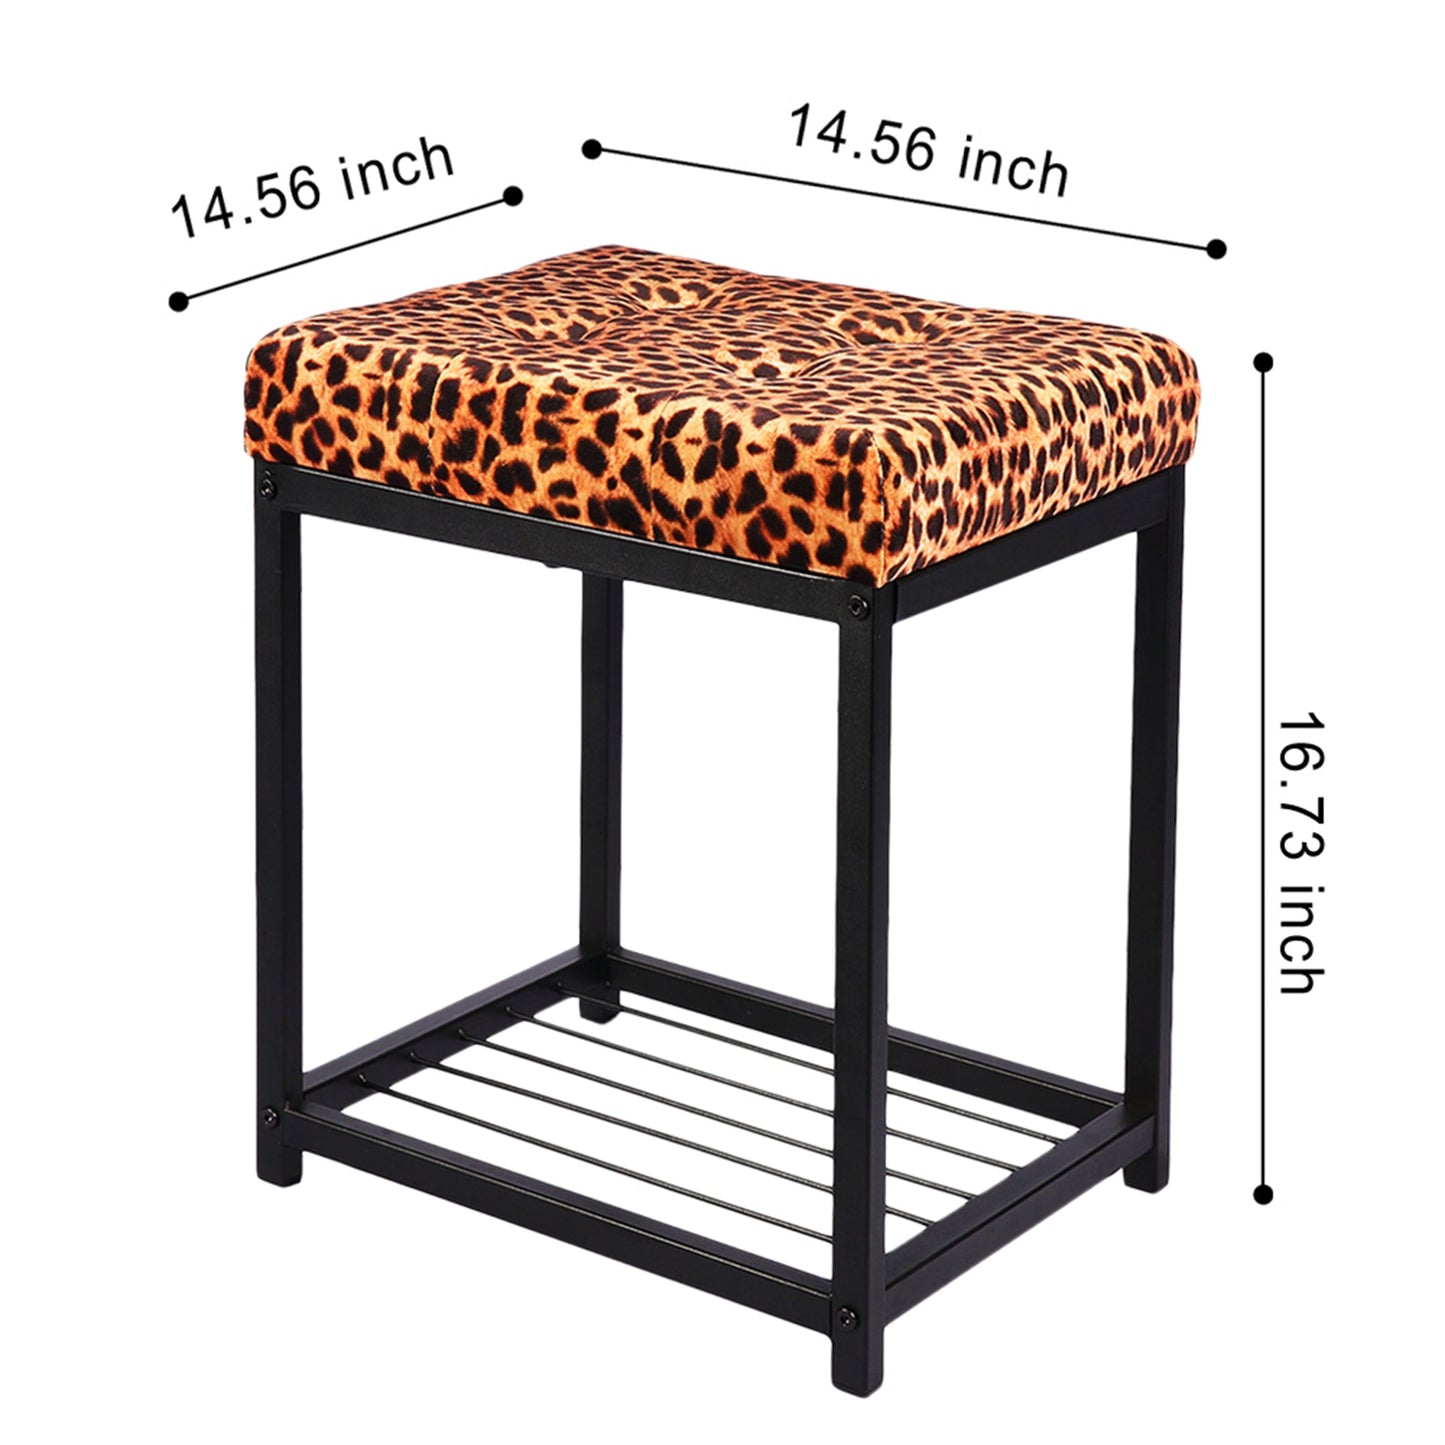 Square Small Bench - Leopard Cheetah